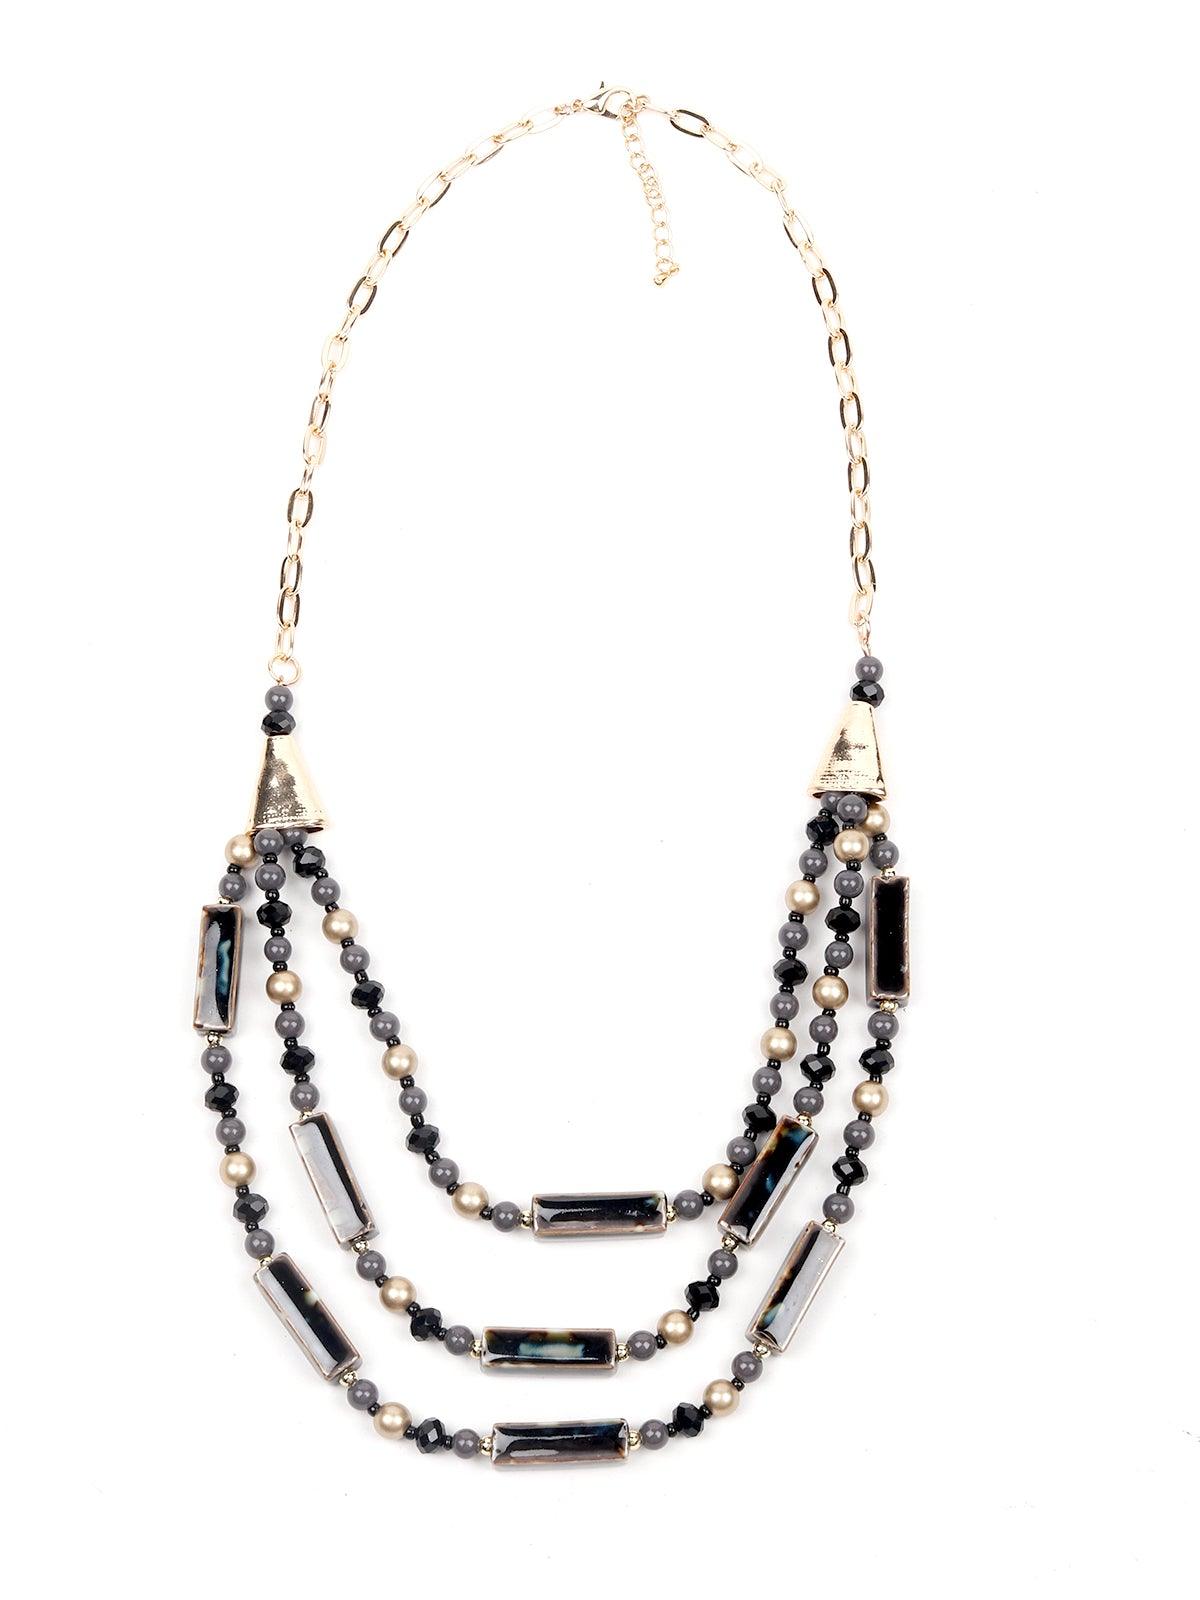 Black And Gold Beaded Necklace - Odette